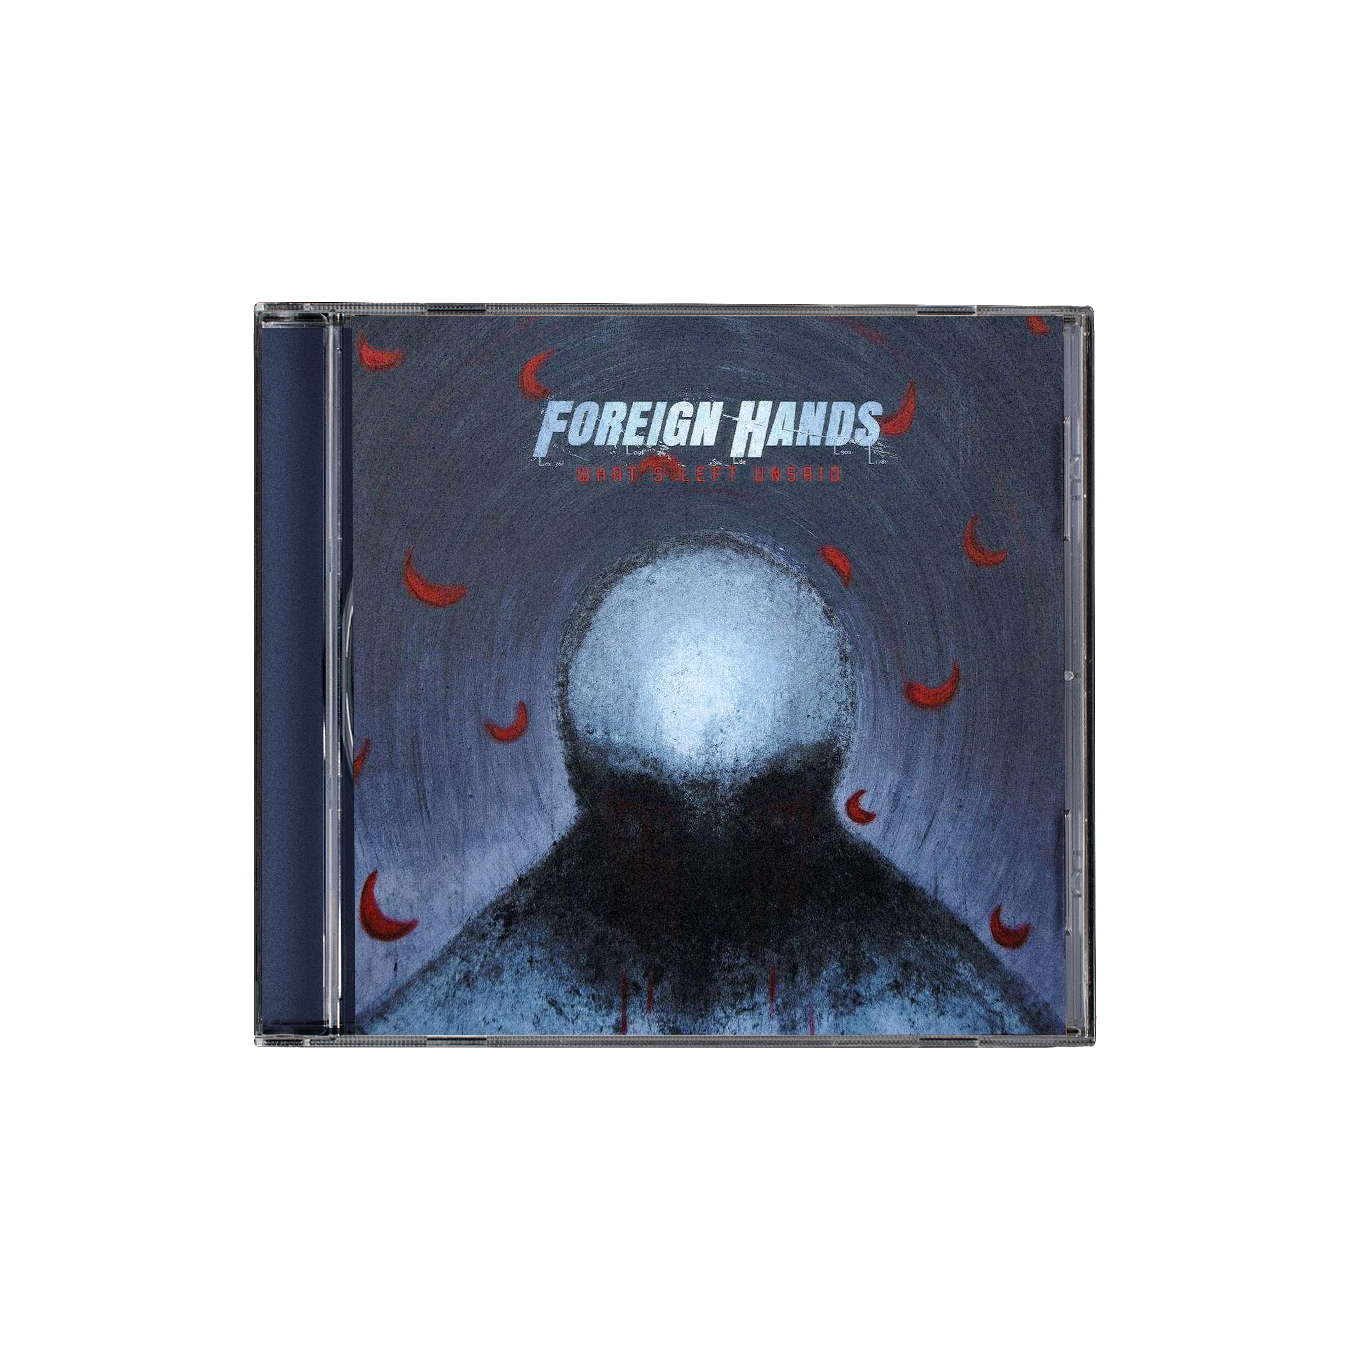 Foreign Hands - 'What's Left Unsaid' CD (Pre-Order)